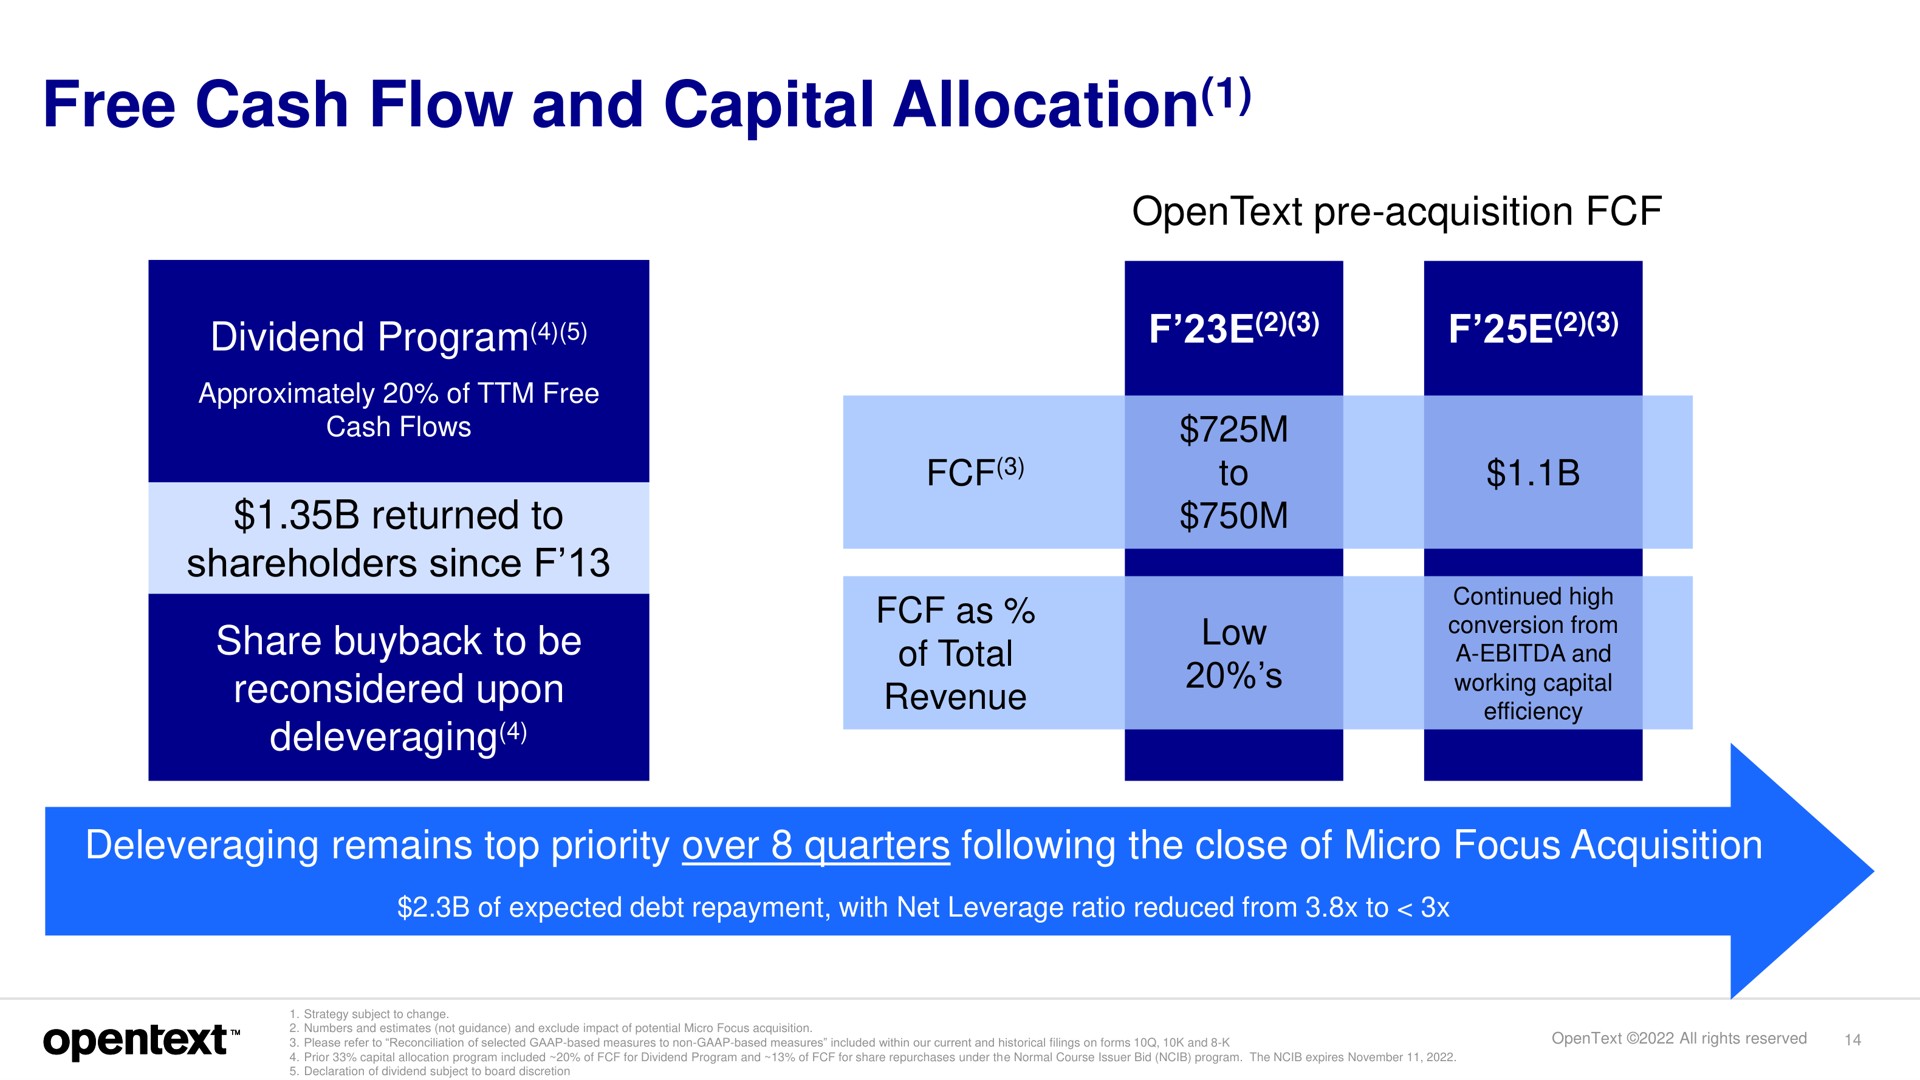 free cash flow and capital allocation a | OpenText